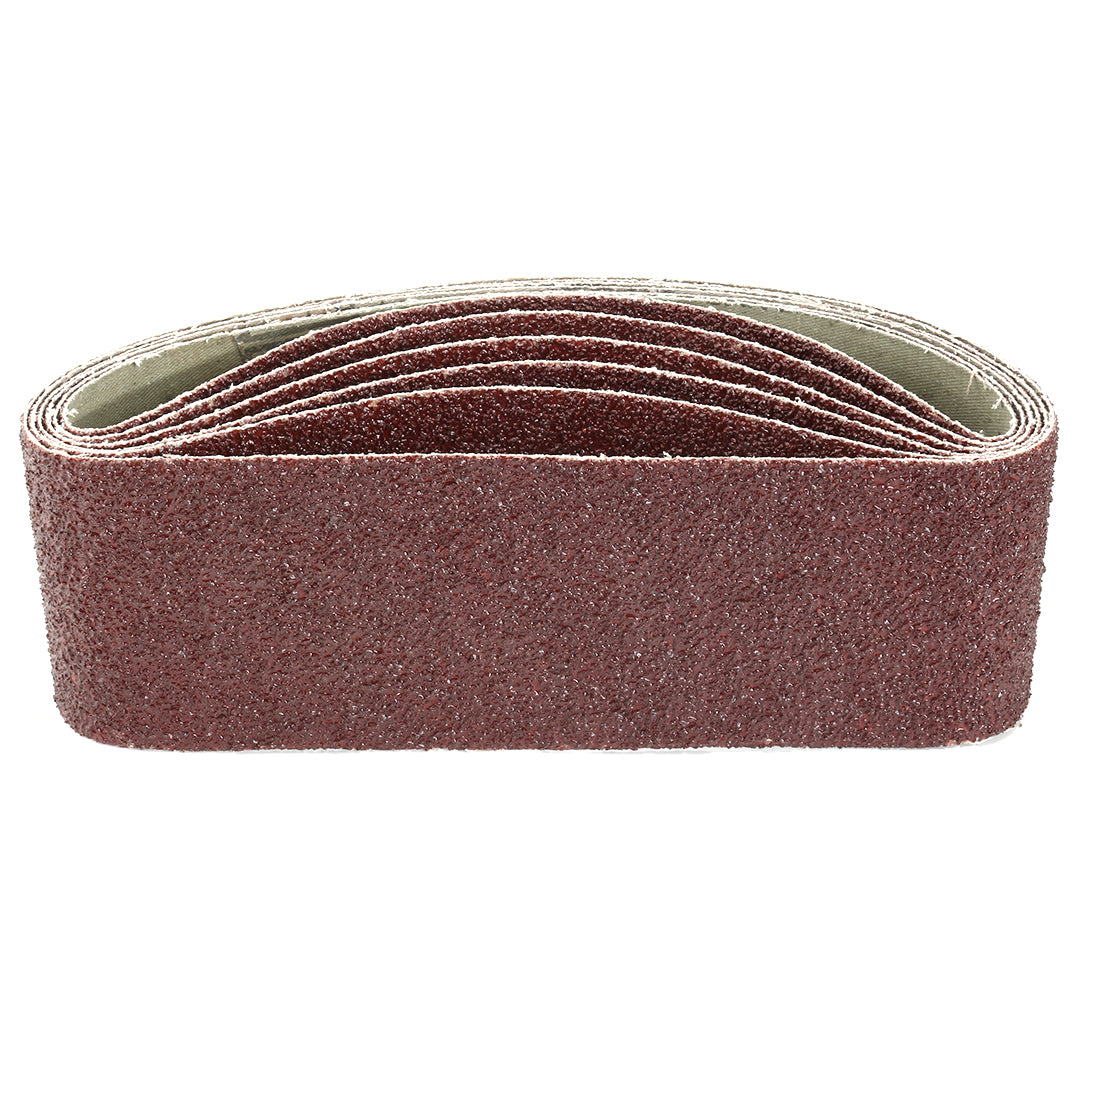 uxcell Uxcell 3-Inch x 21-Inch Aluminum Oxide Sanding Belt 36 Grits Lapped Joint 6pcs